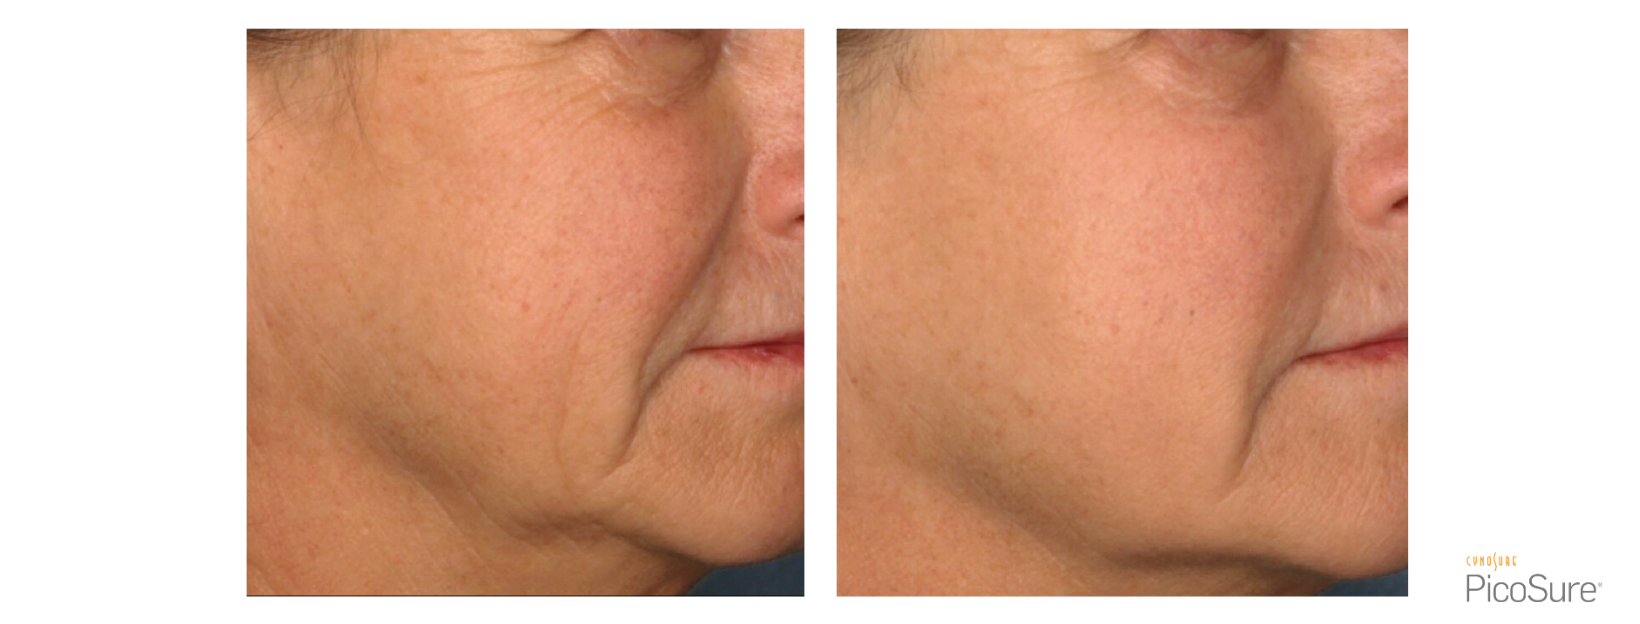 PicoSure Fine Lines & Wrinkles Cheeks and mouth